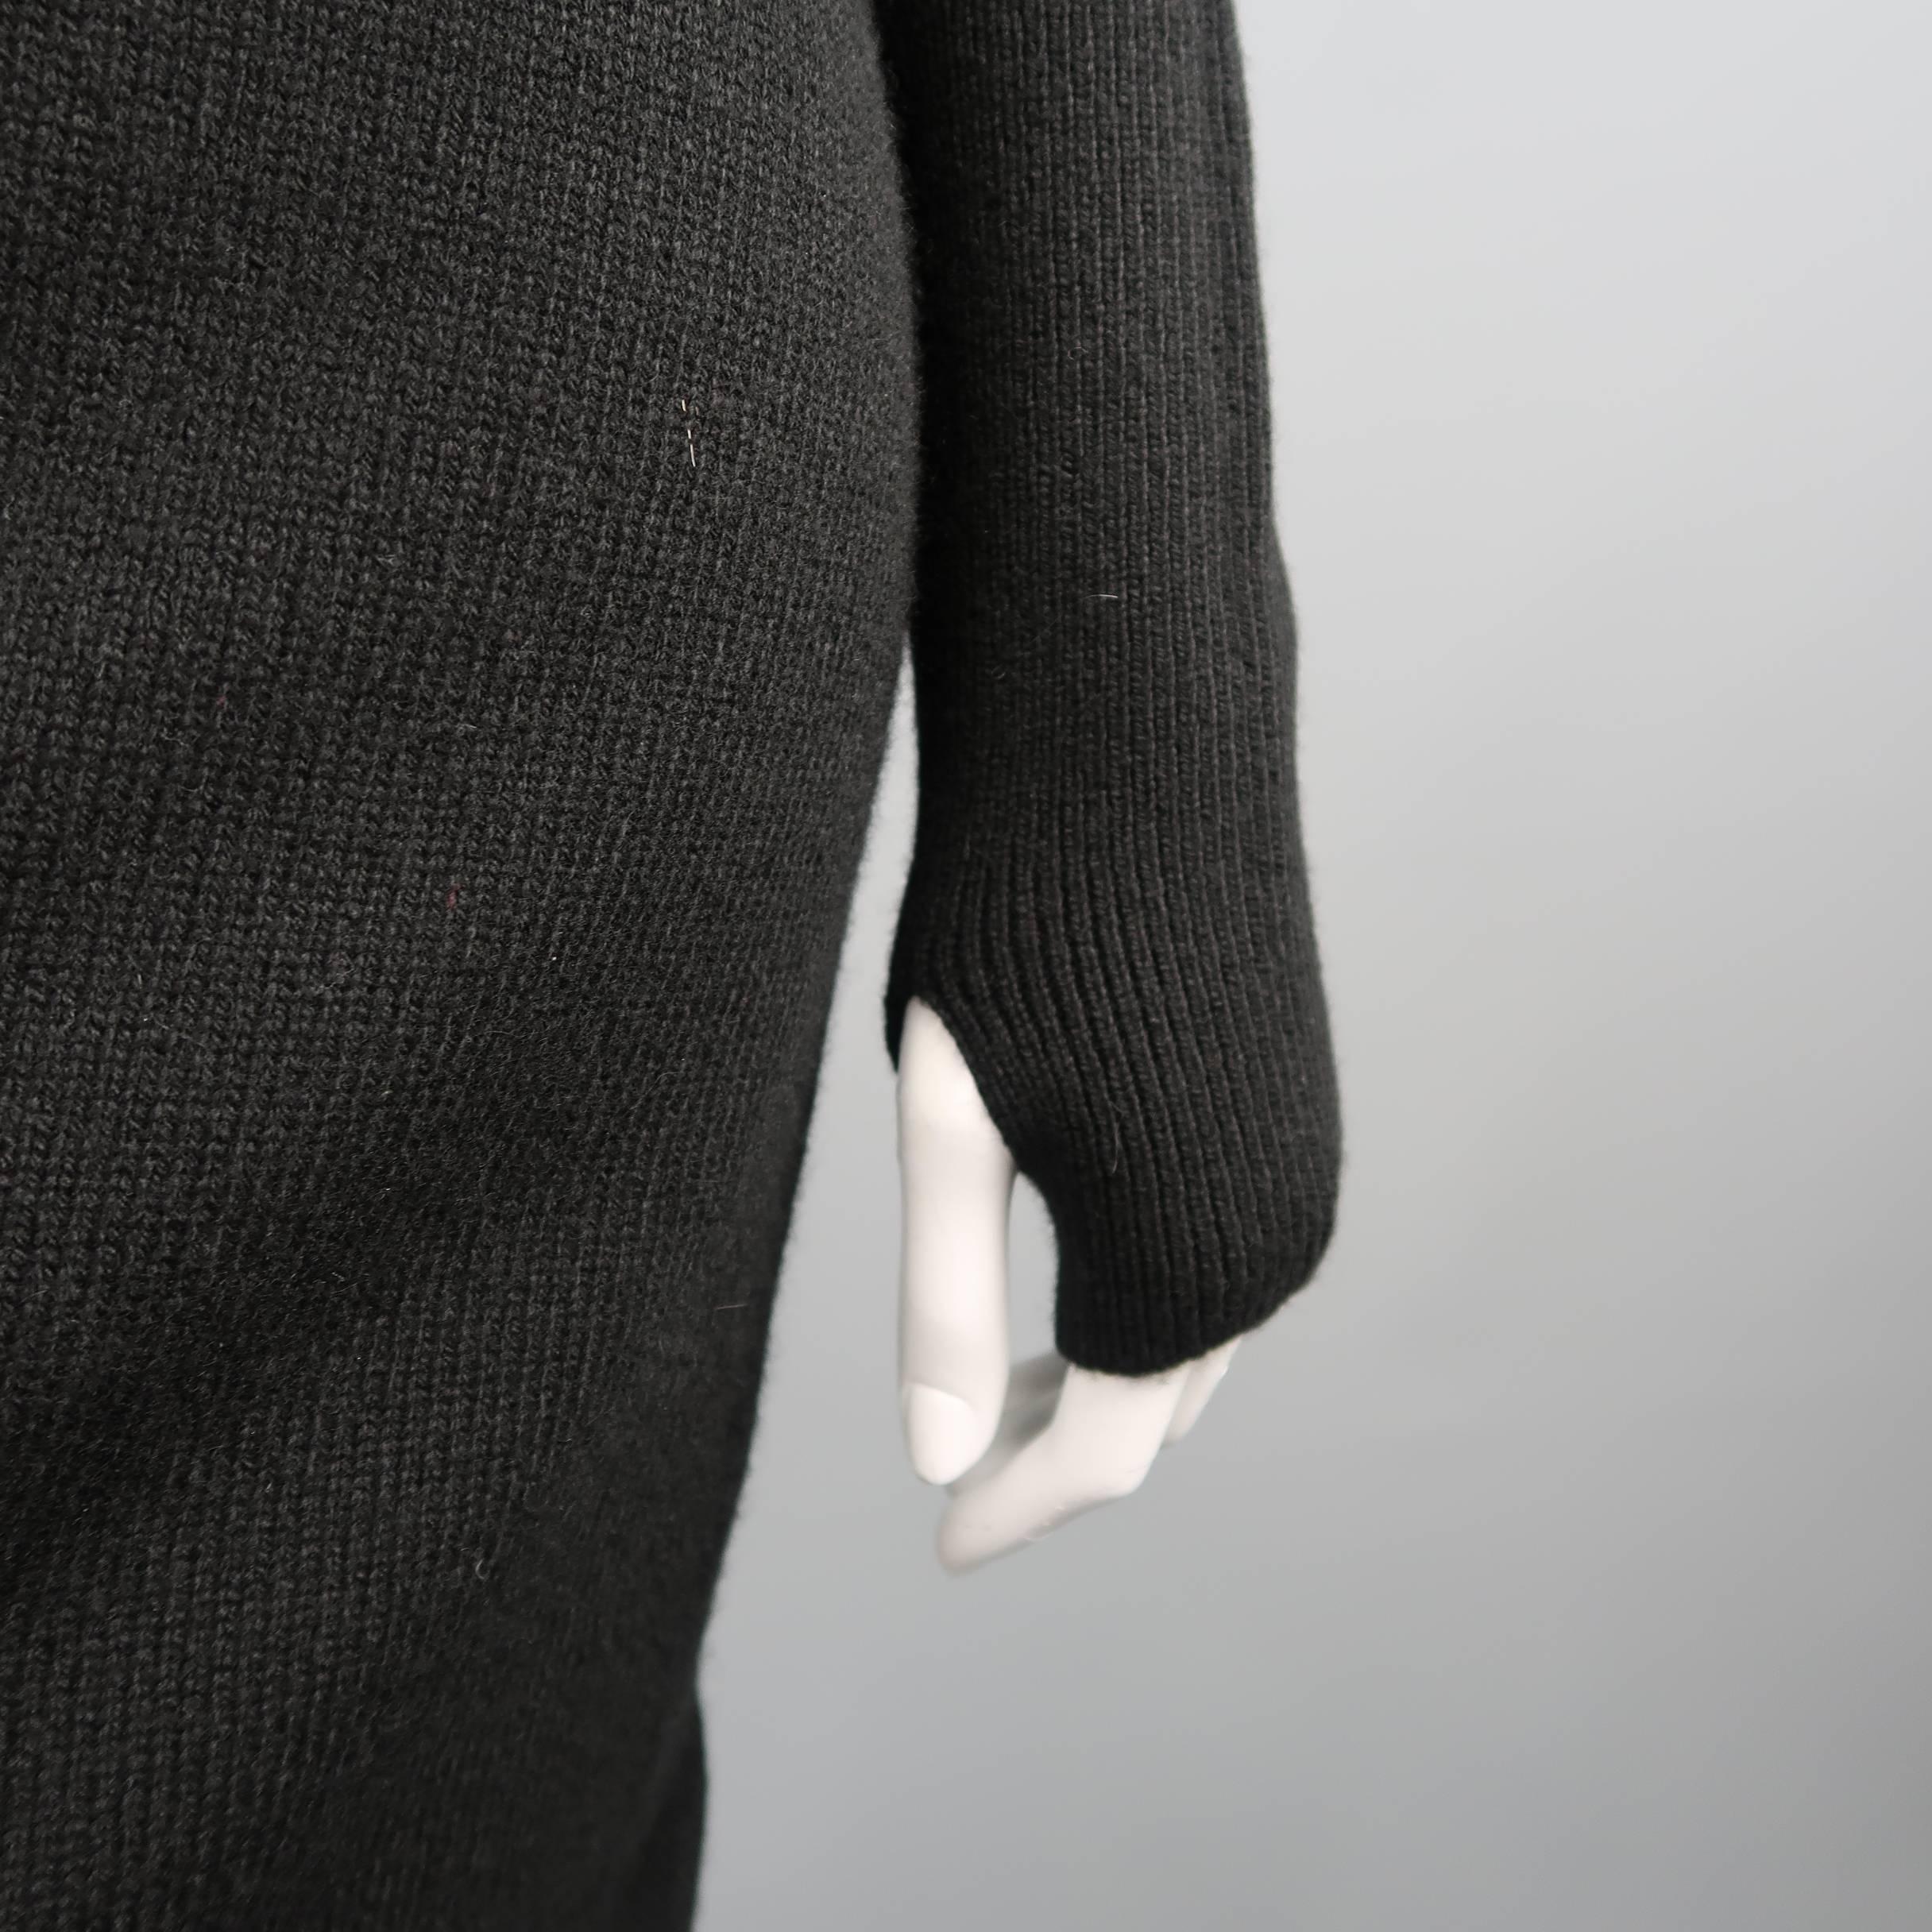 tom ford cashmere sweater dress